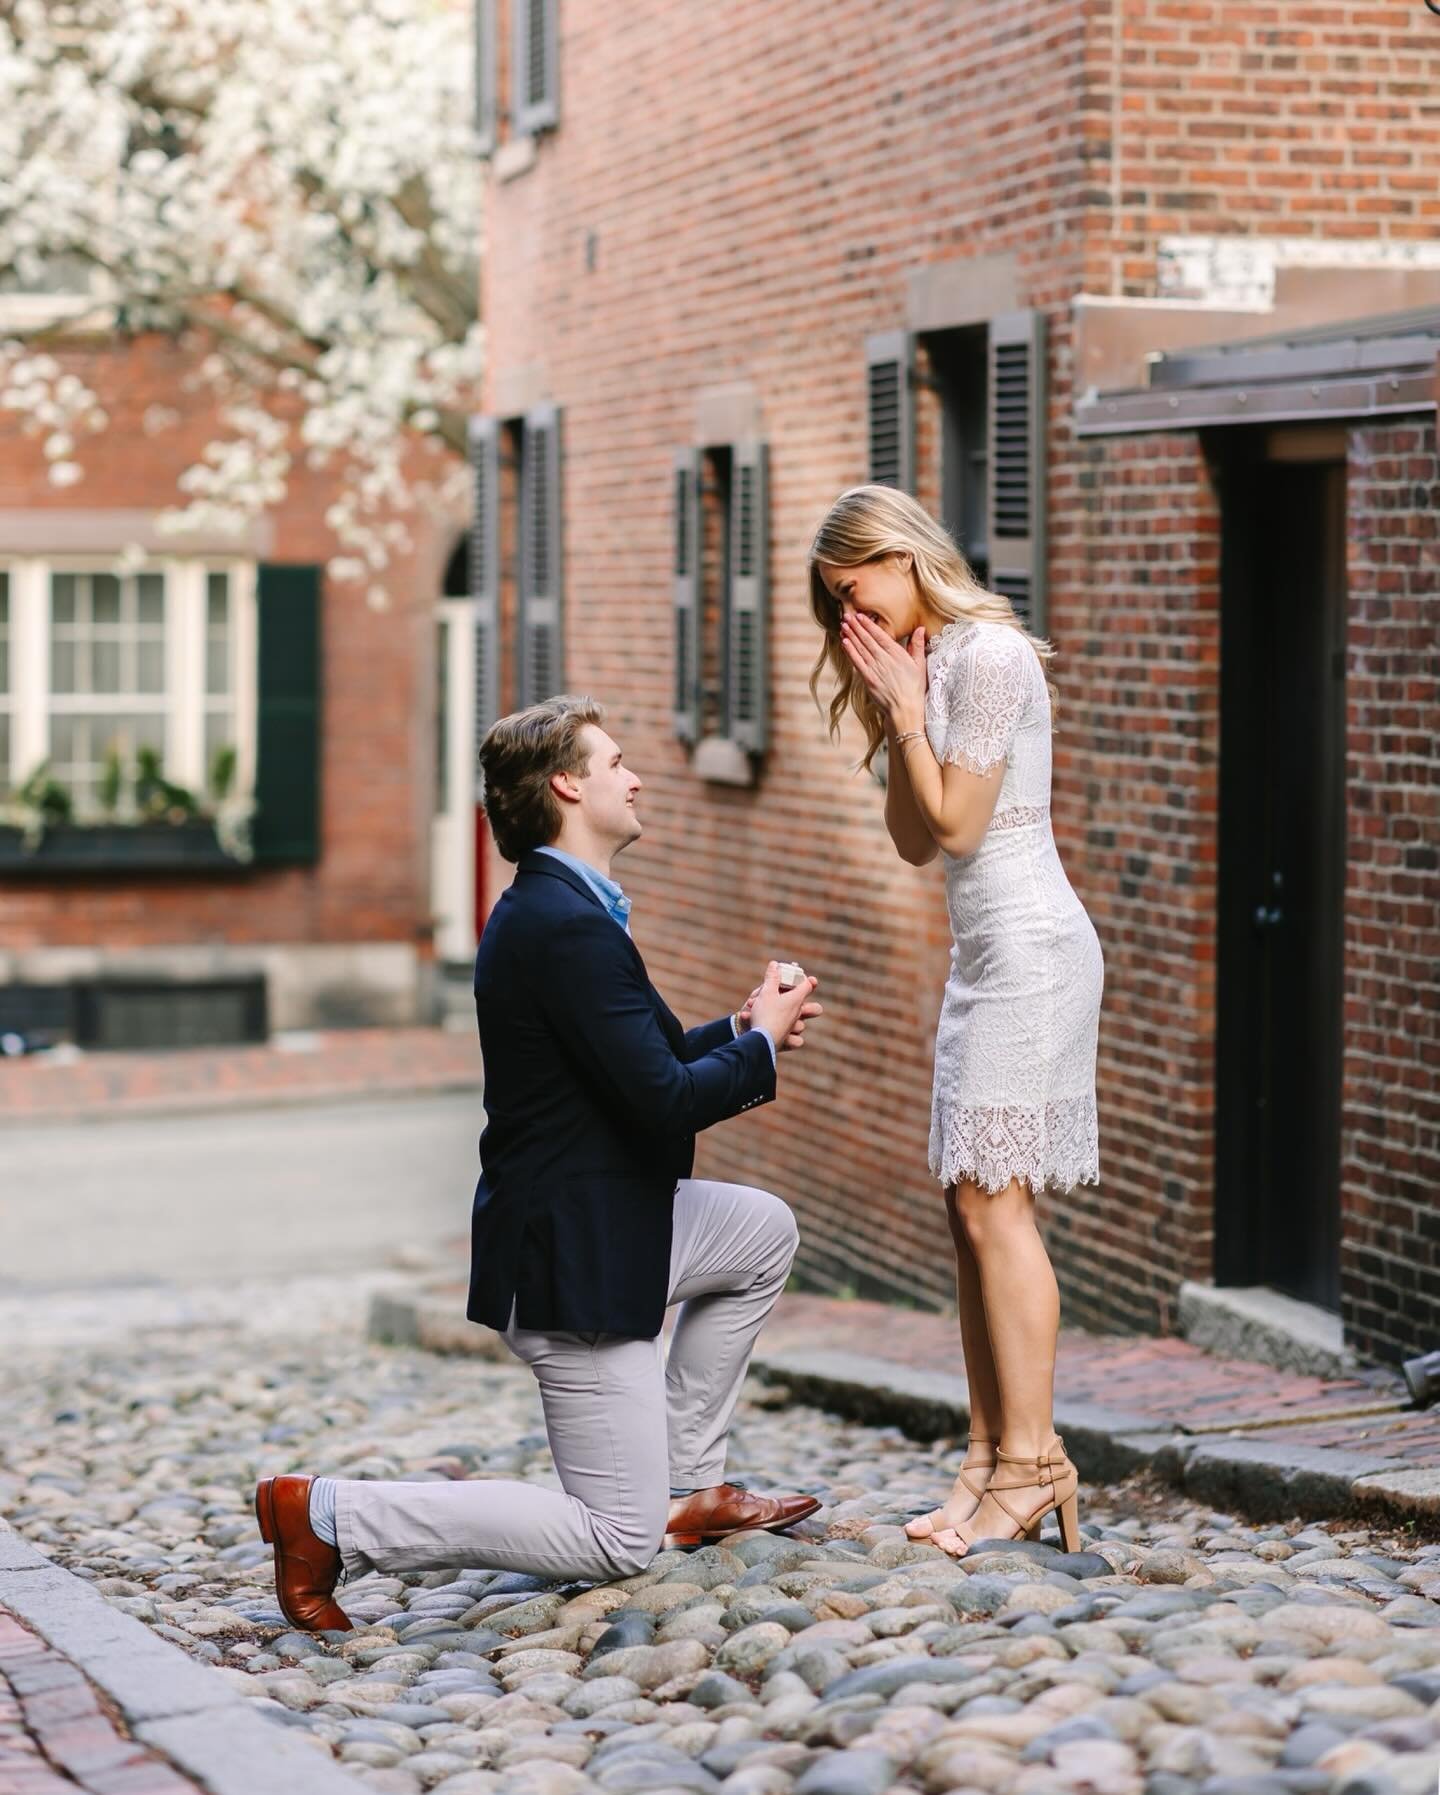 Planning a photo shoot with your partner is the perfect cover for a surprise proposal. It gives you an excuse to get all dressed up and ensure you both look your best.

Even better, if you work with your photographer you can even plan to have a &ldqu